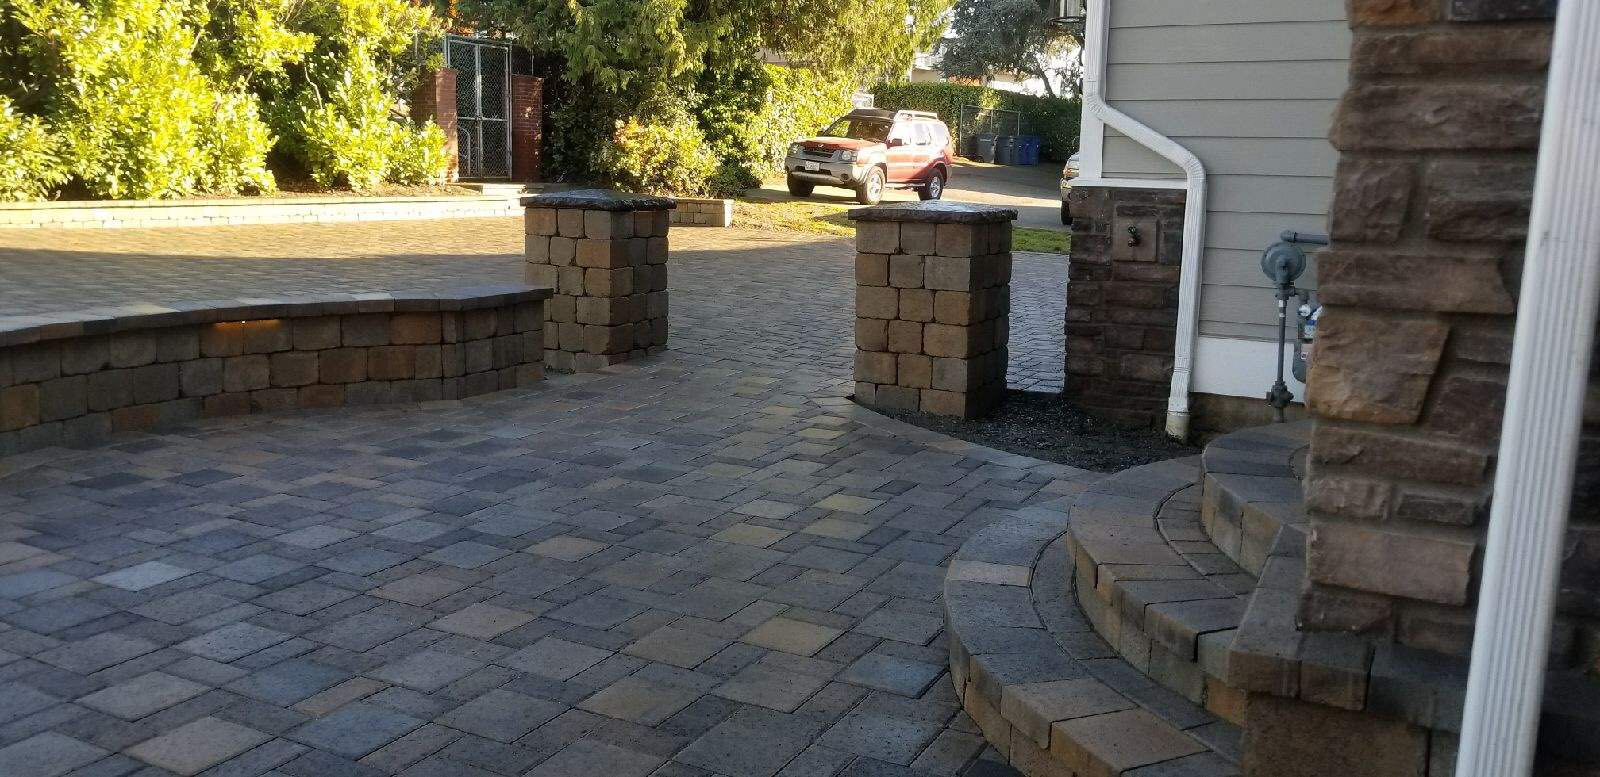 Middlesex County Paver Patio Contractor: Importance of Choosing the Right One